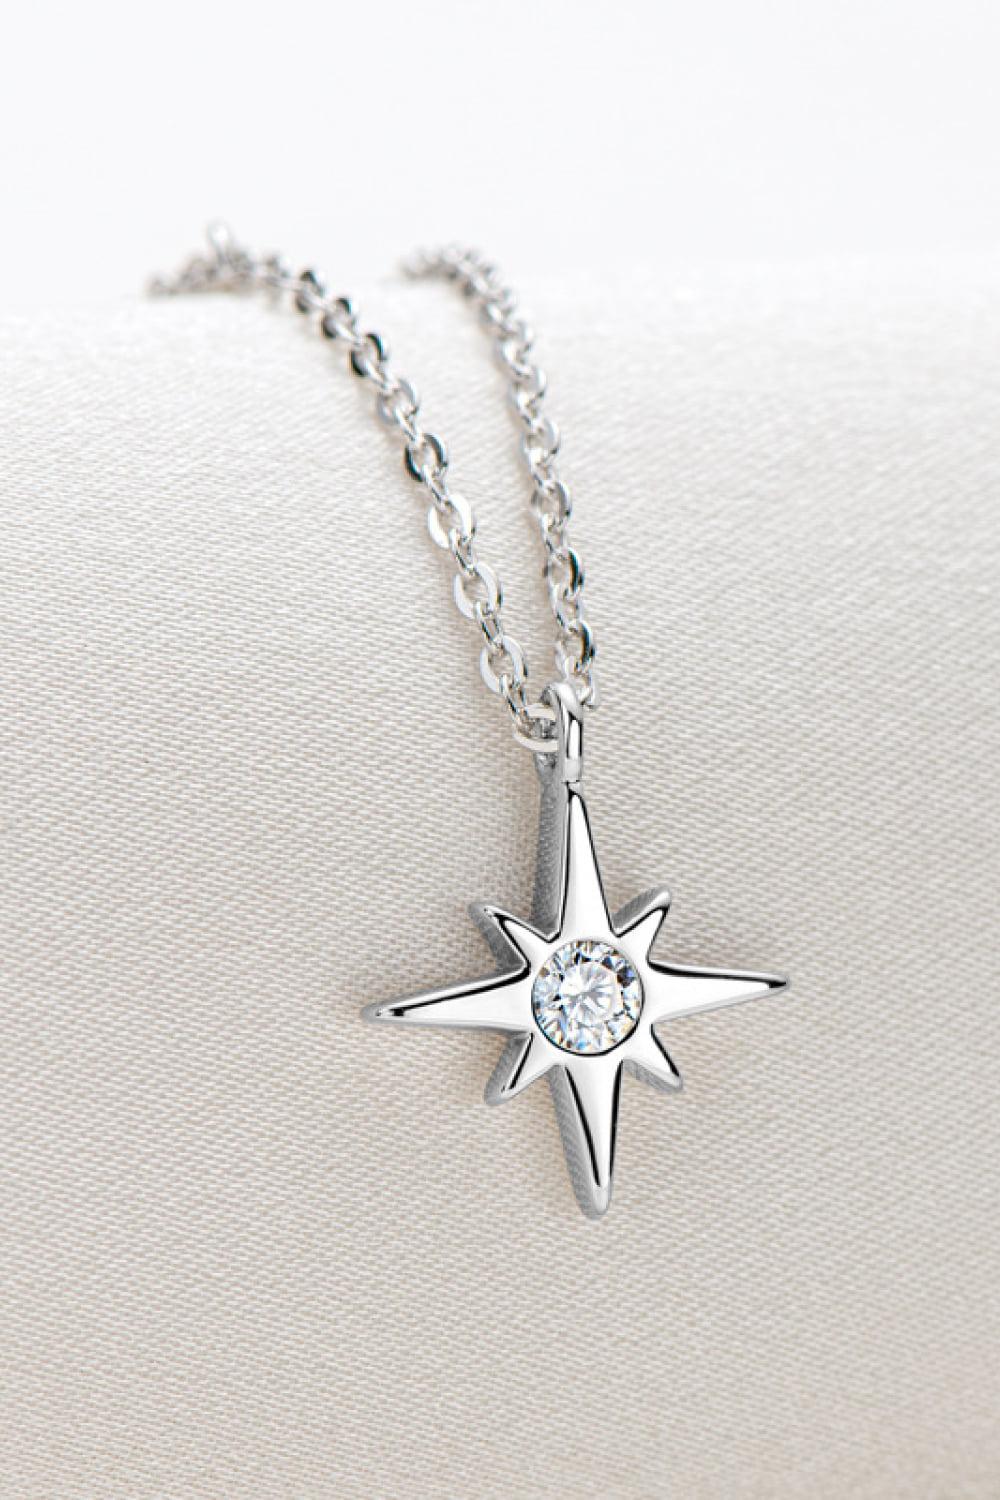 Moissanite North Star Pendant 925 Sterling Silver Necklace BLUE ZONE PLANET